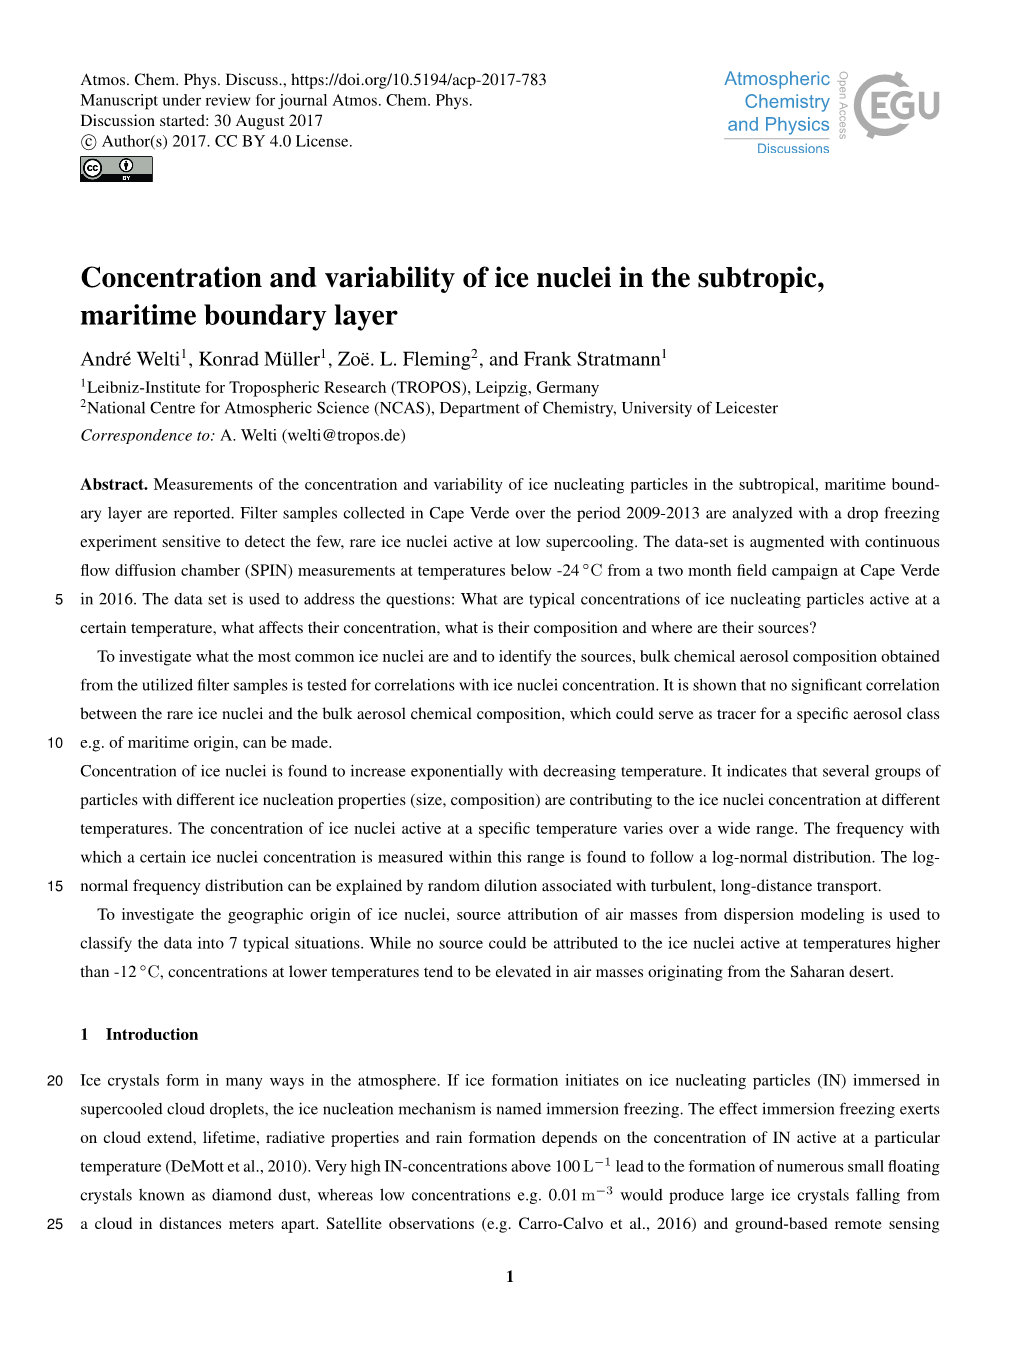 Concentration and Variability of Ice Nuclei in the Subtropic, Maritime Boundary Layer André Welti1, Konrad Müller1, Zoë